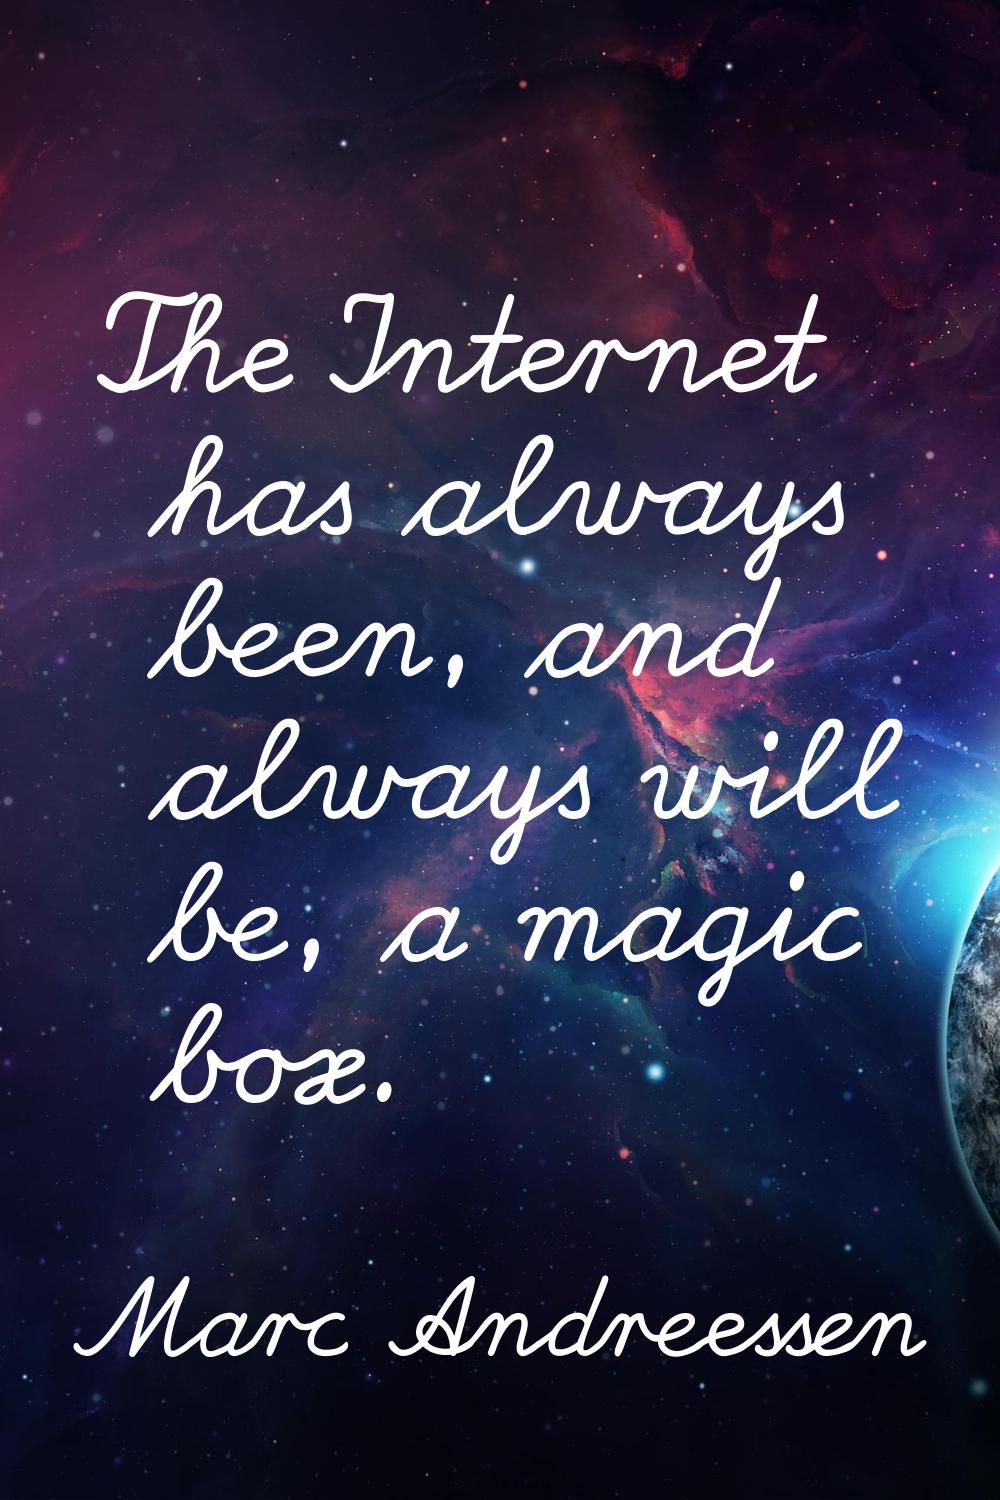 The Internet has always been, and always will be, a magic box.